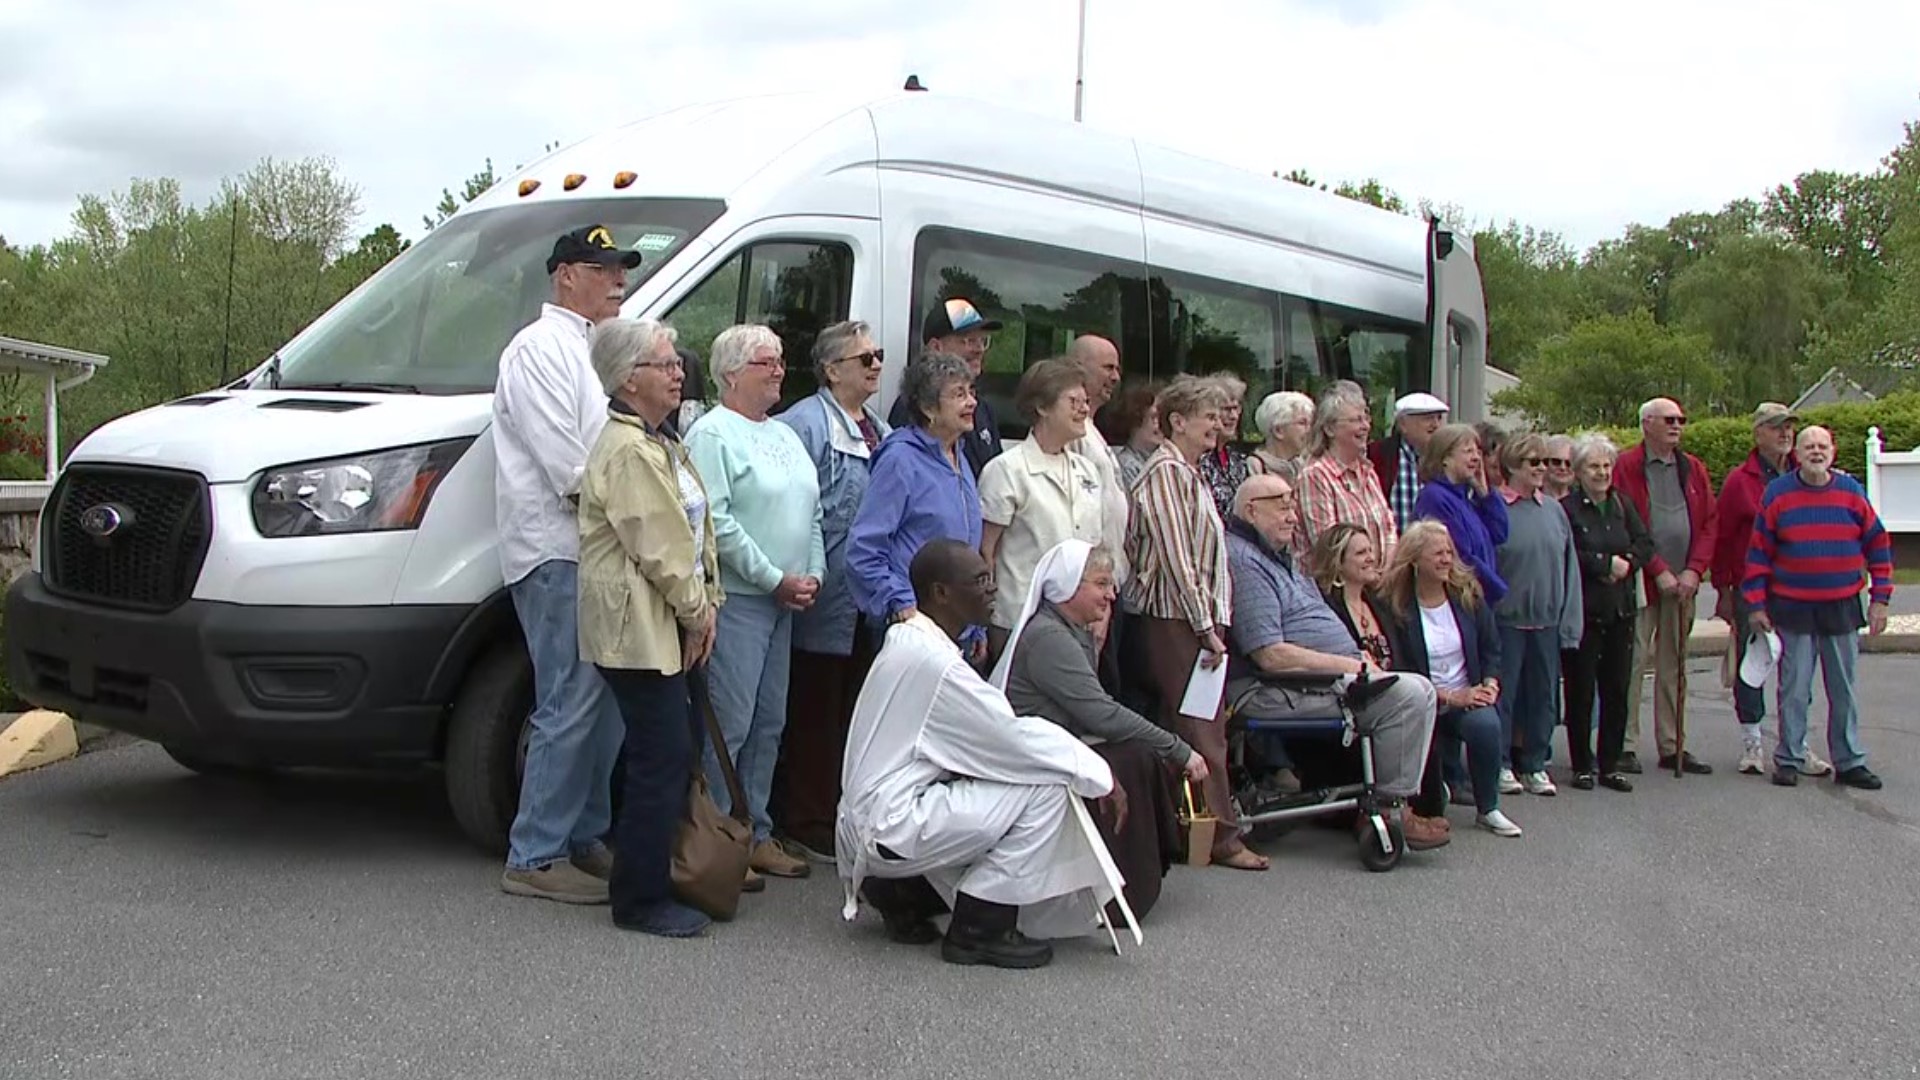 Officials hope the new vehicle will increase the quality of life for their residents.